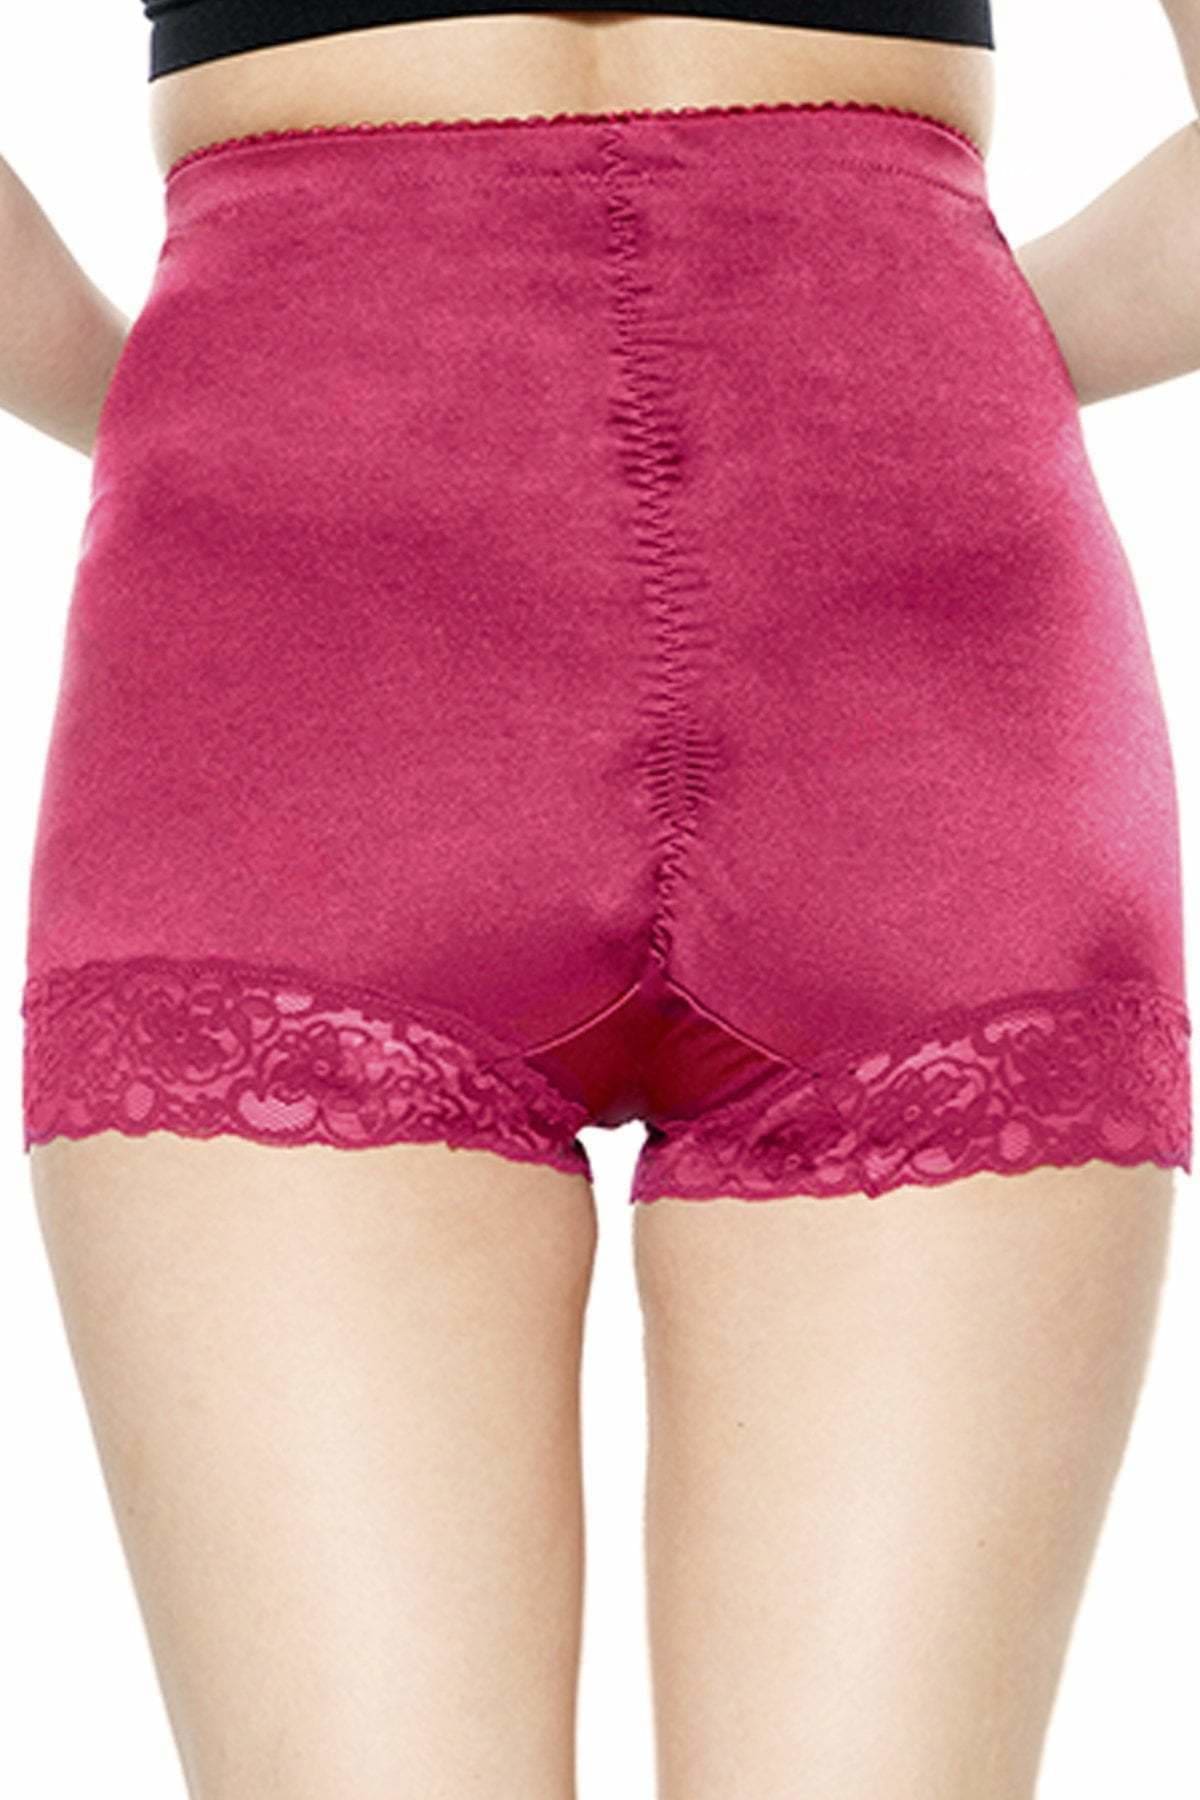 Pin Up Girl Lace Control Panty : Sale Colors